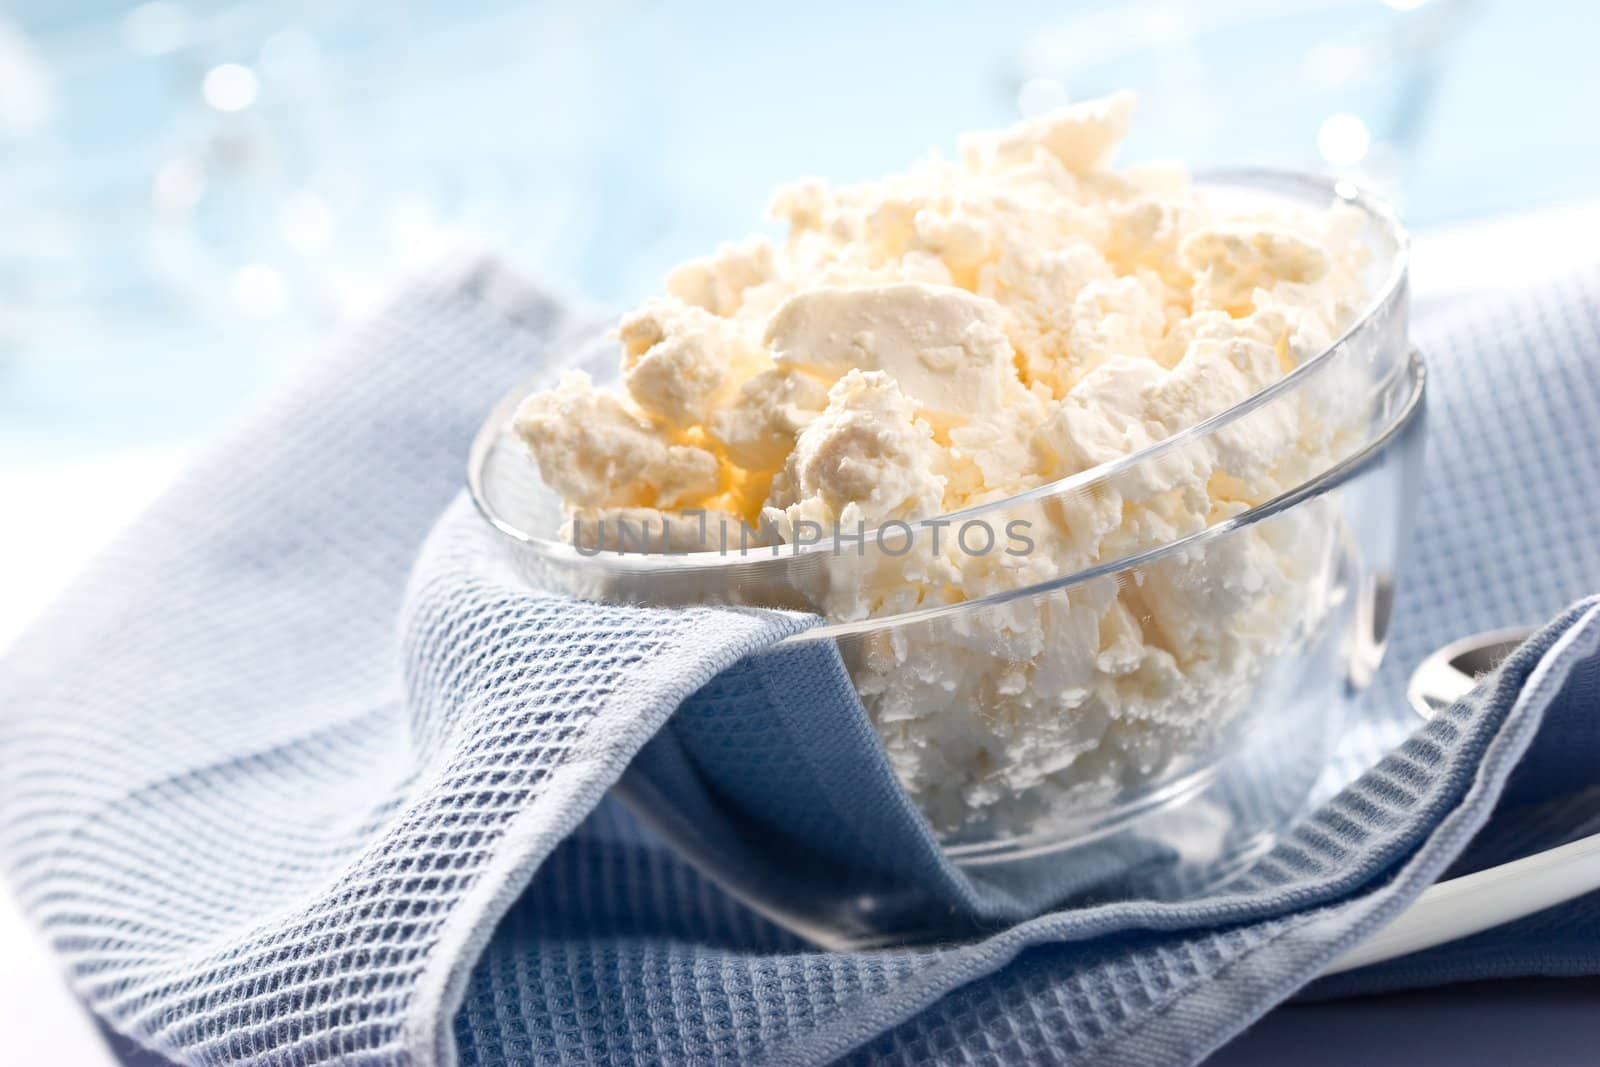 Food serias. Glass bowl with soft cheese